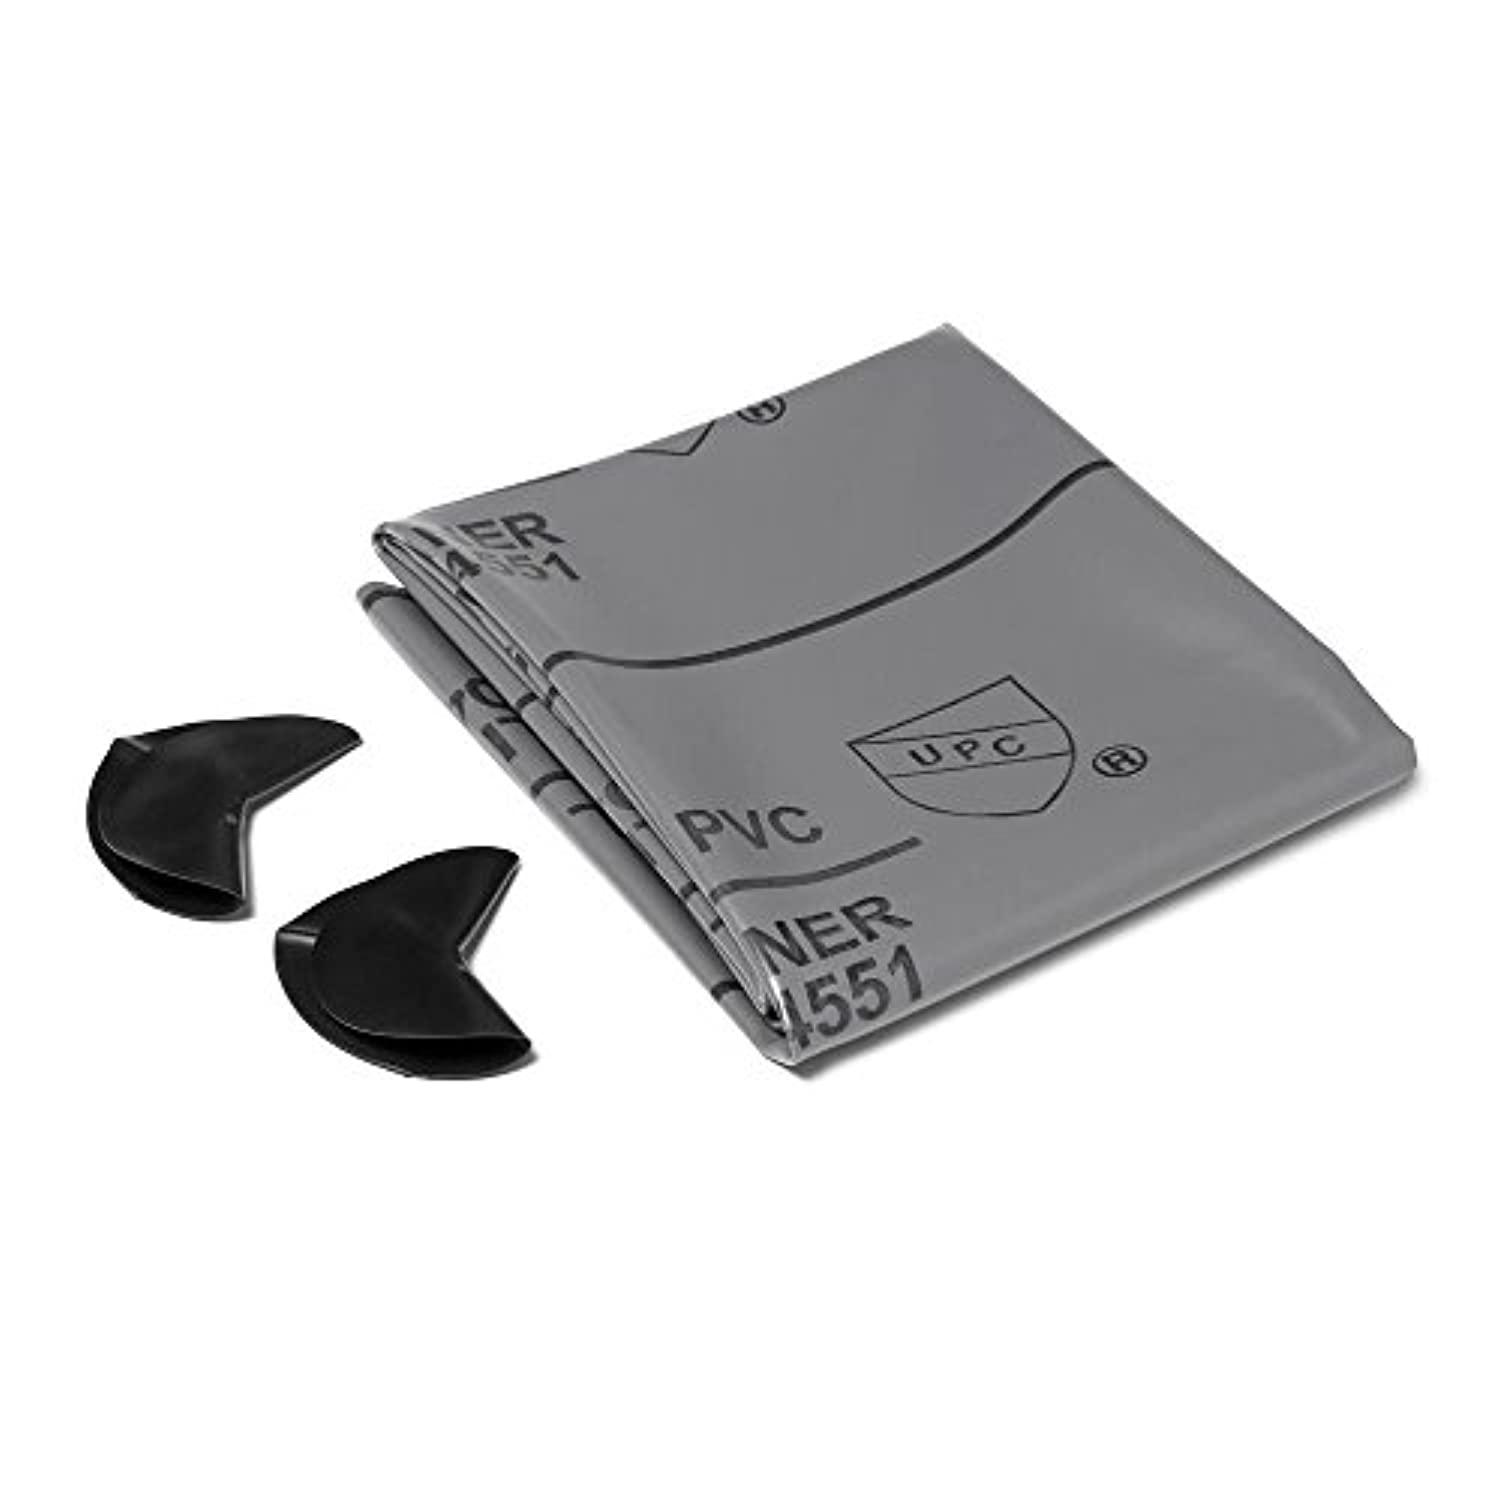 oatey 41620 5' x 6' pvc shower pan liner kit with dam corners, 40 mil, gray